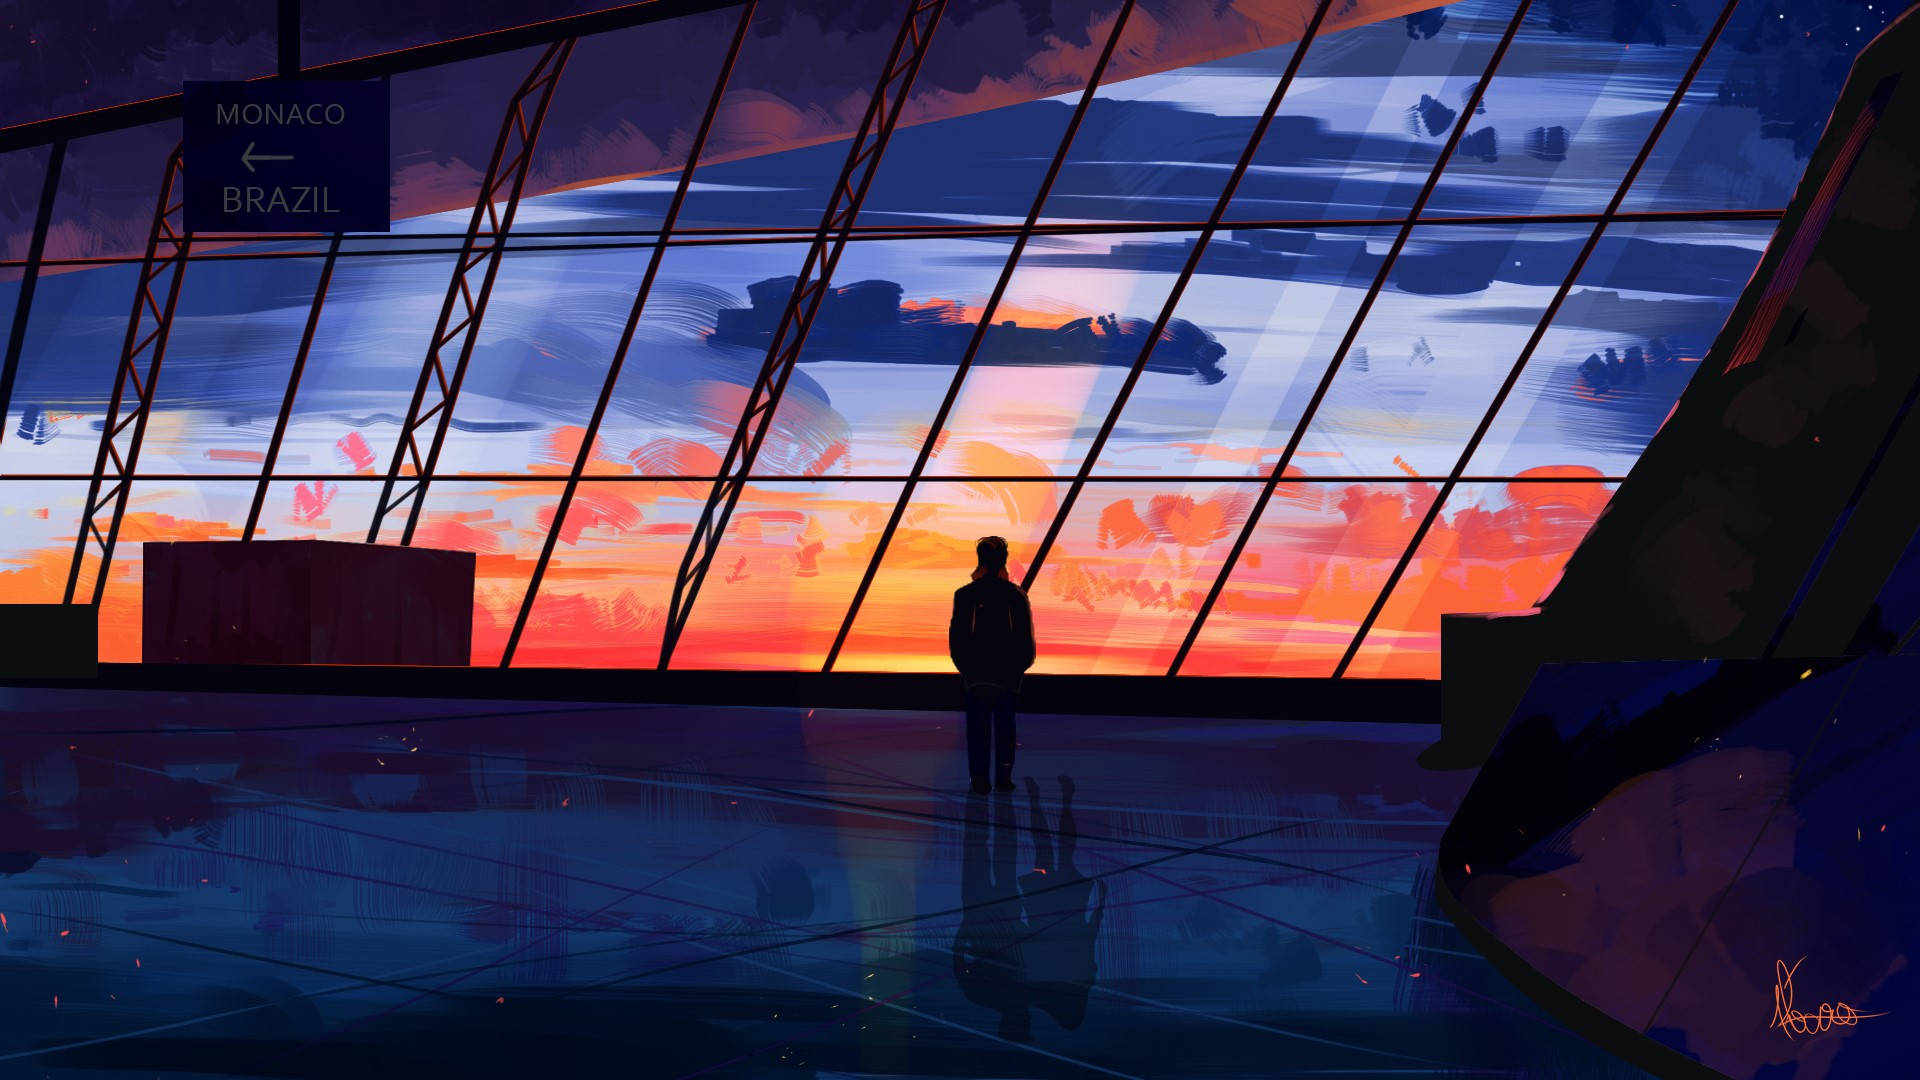 Animated Image Of An Airport Wallpaper